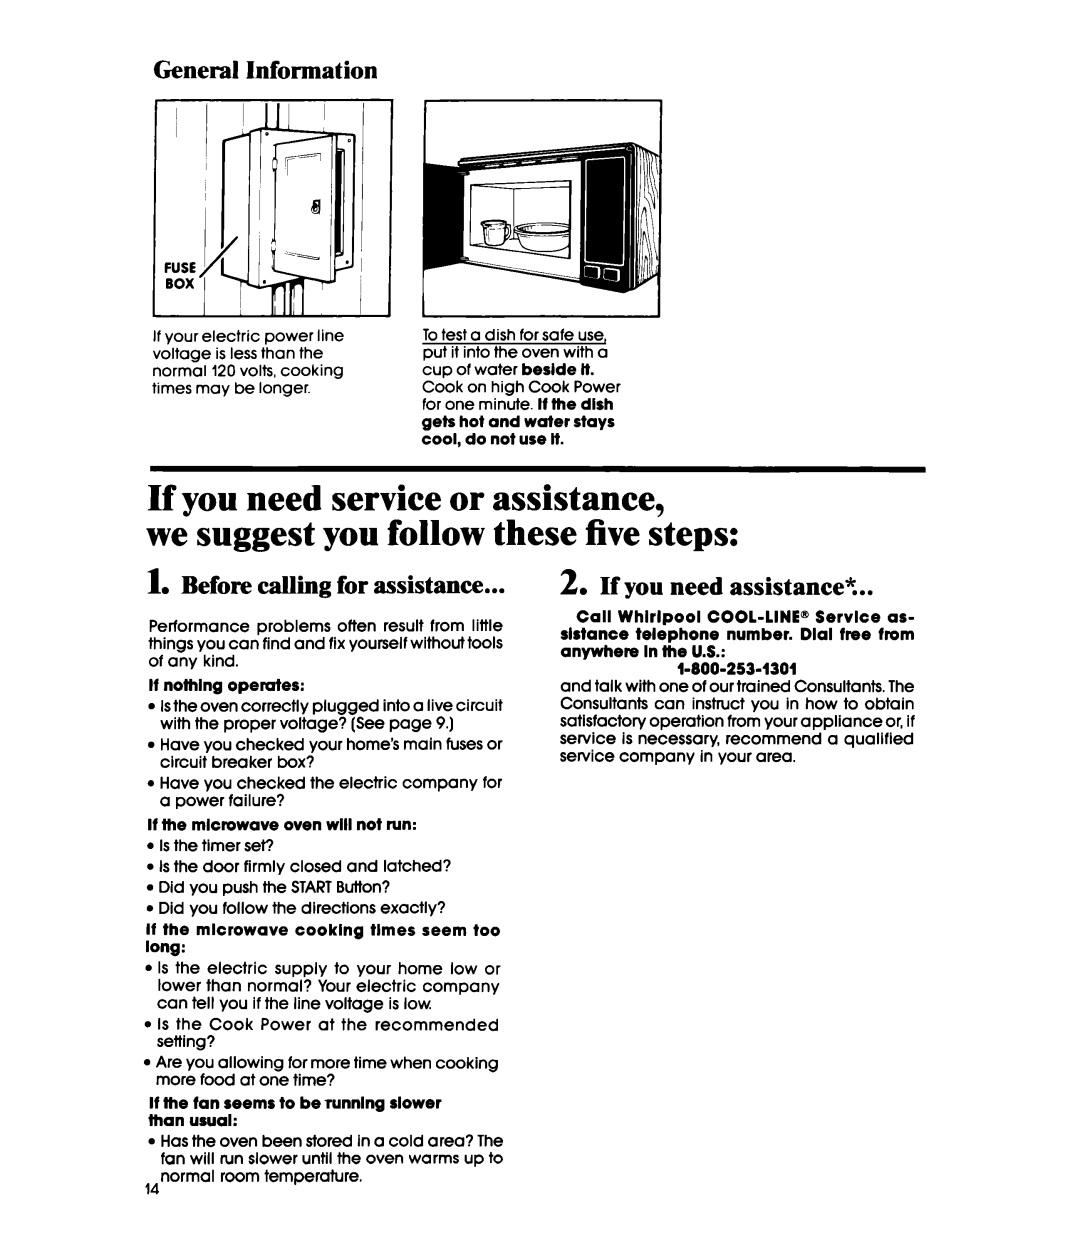 Whirlpool MW32OOXS manual If you need service or assistance, we suggest you follow these five steps, General Information 